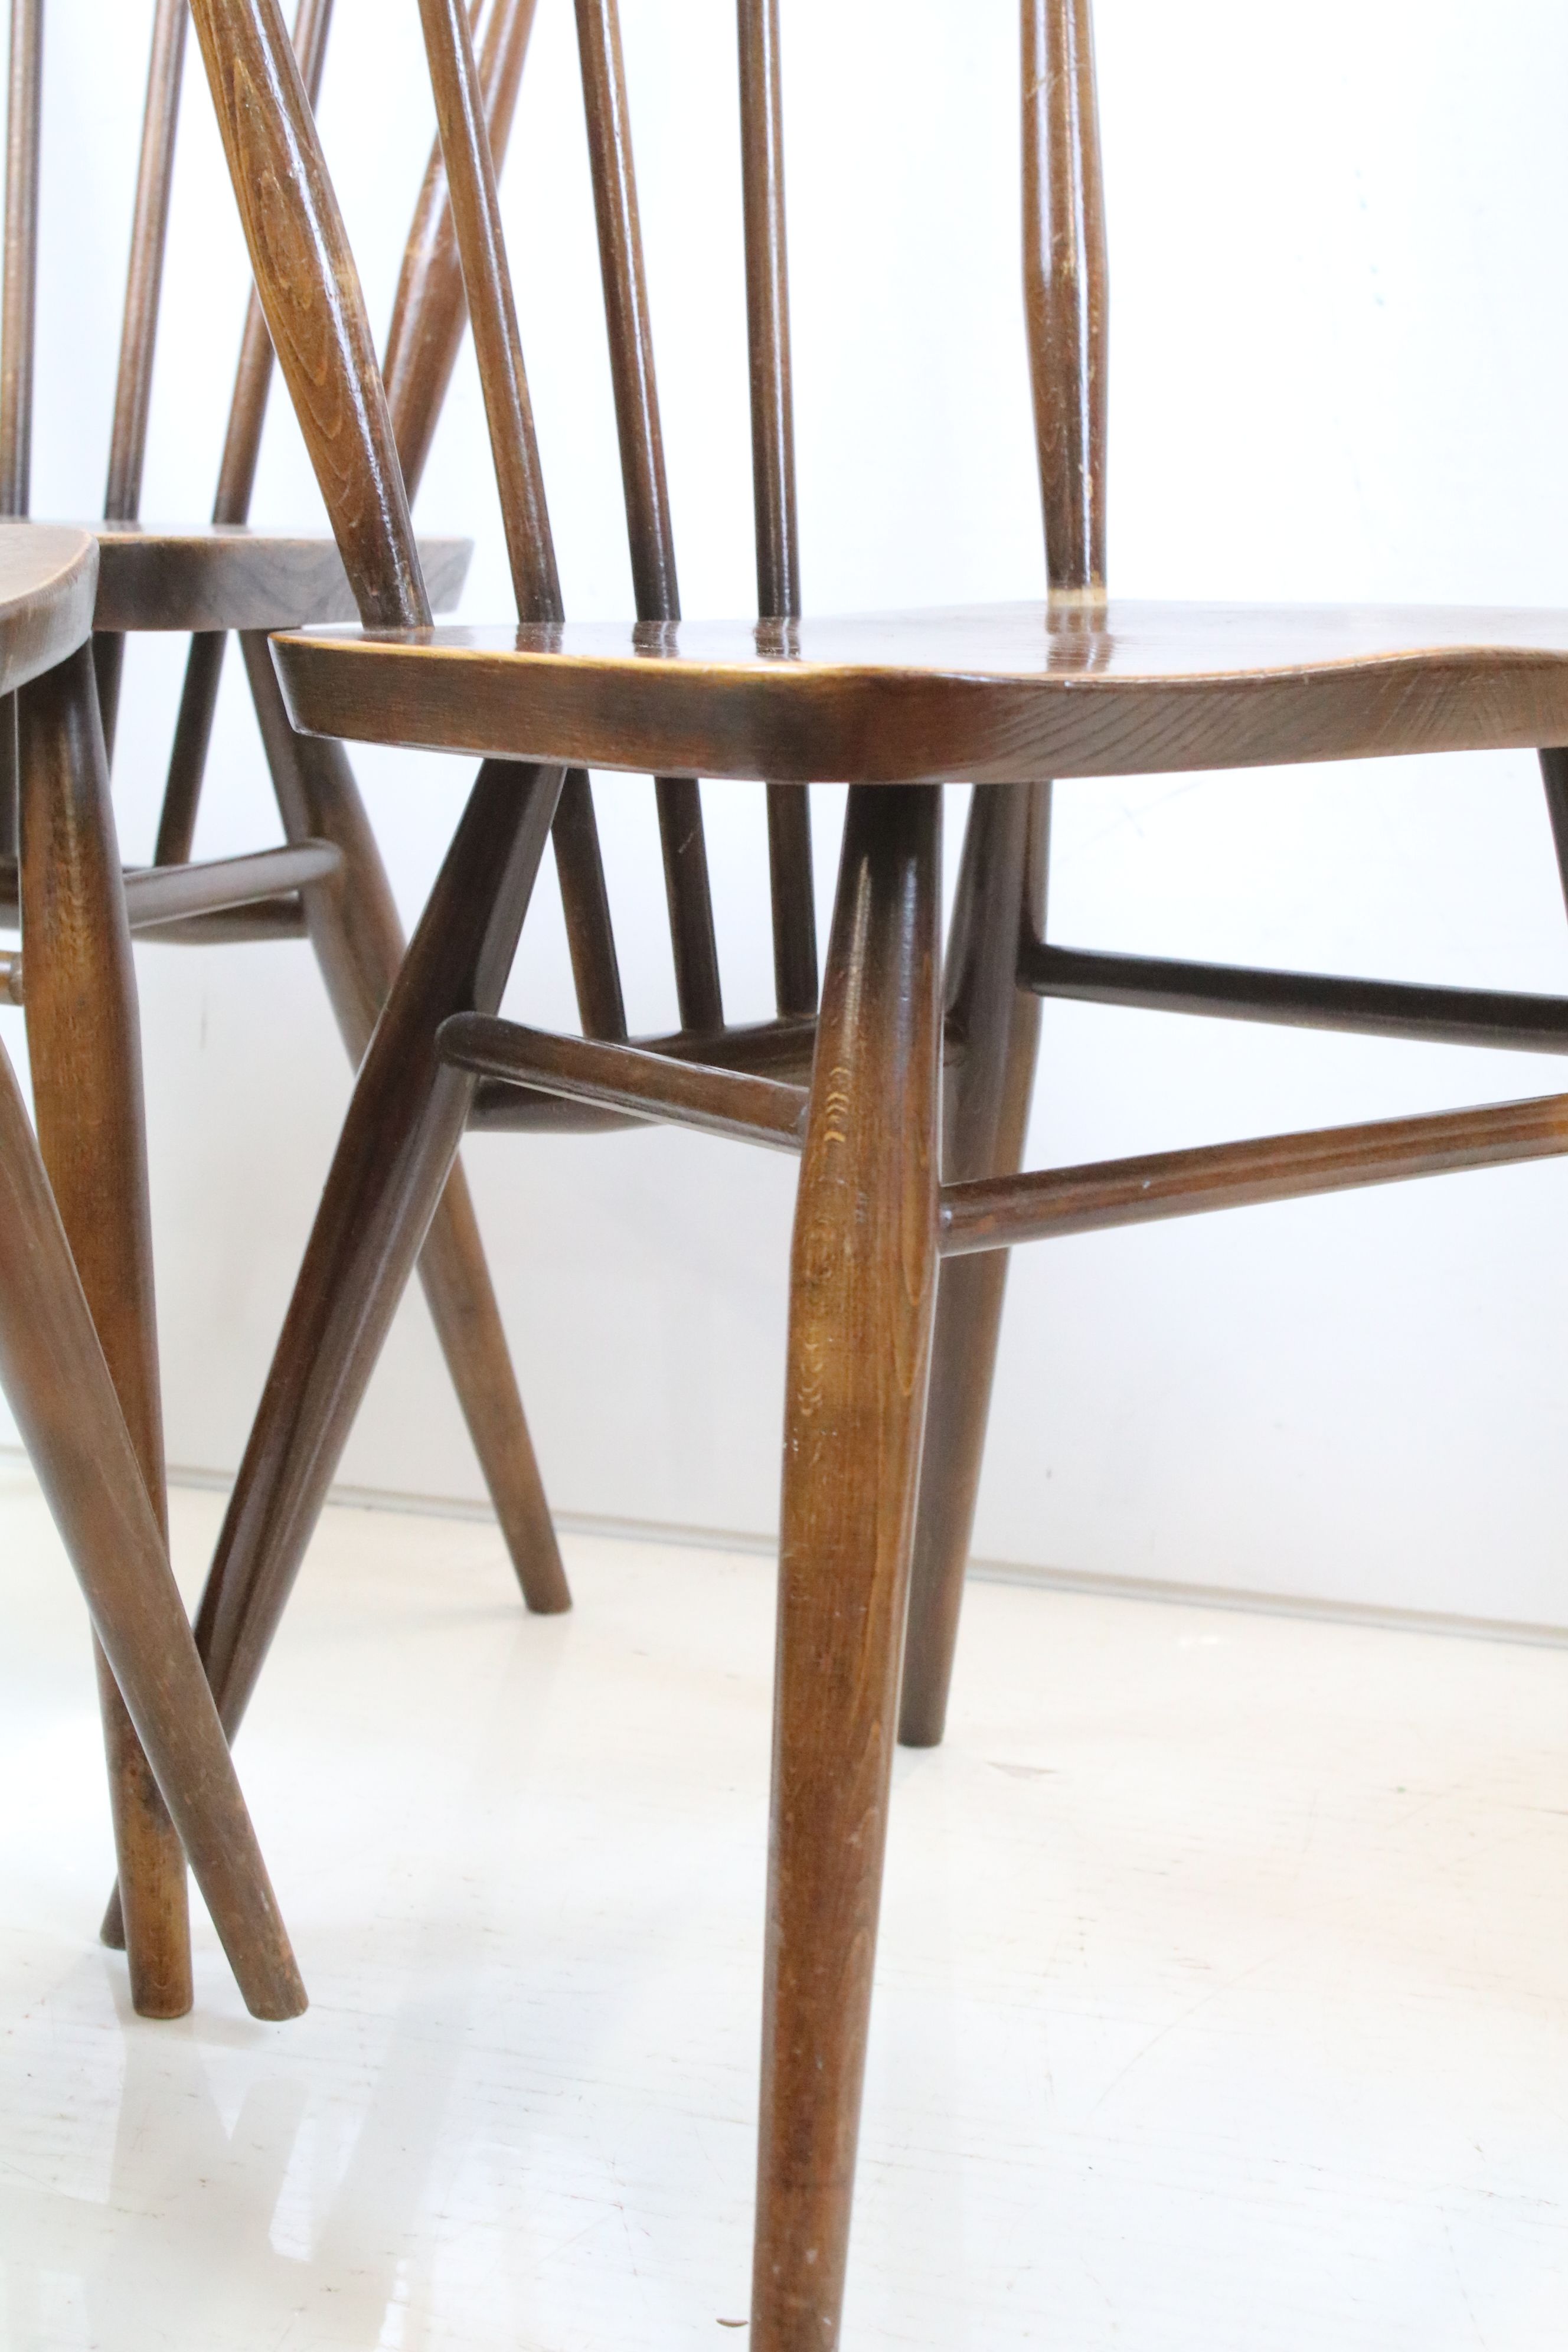 Set of Four Ercol Elm and Beech Dining Chairs, model 391, each chair 77cm high x 40cm wide - Image 4 of 5